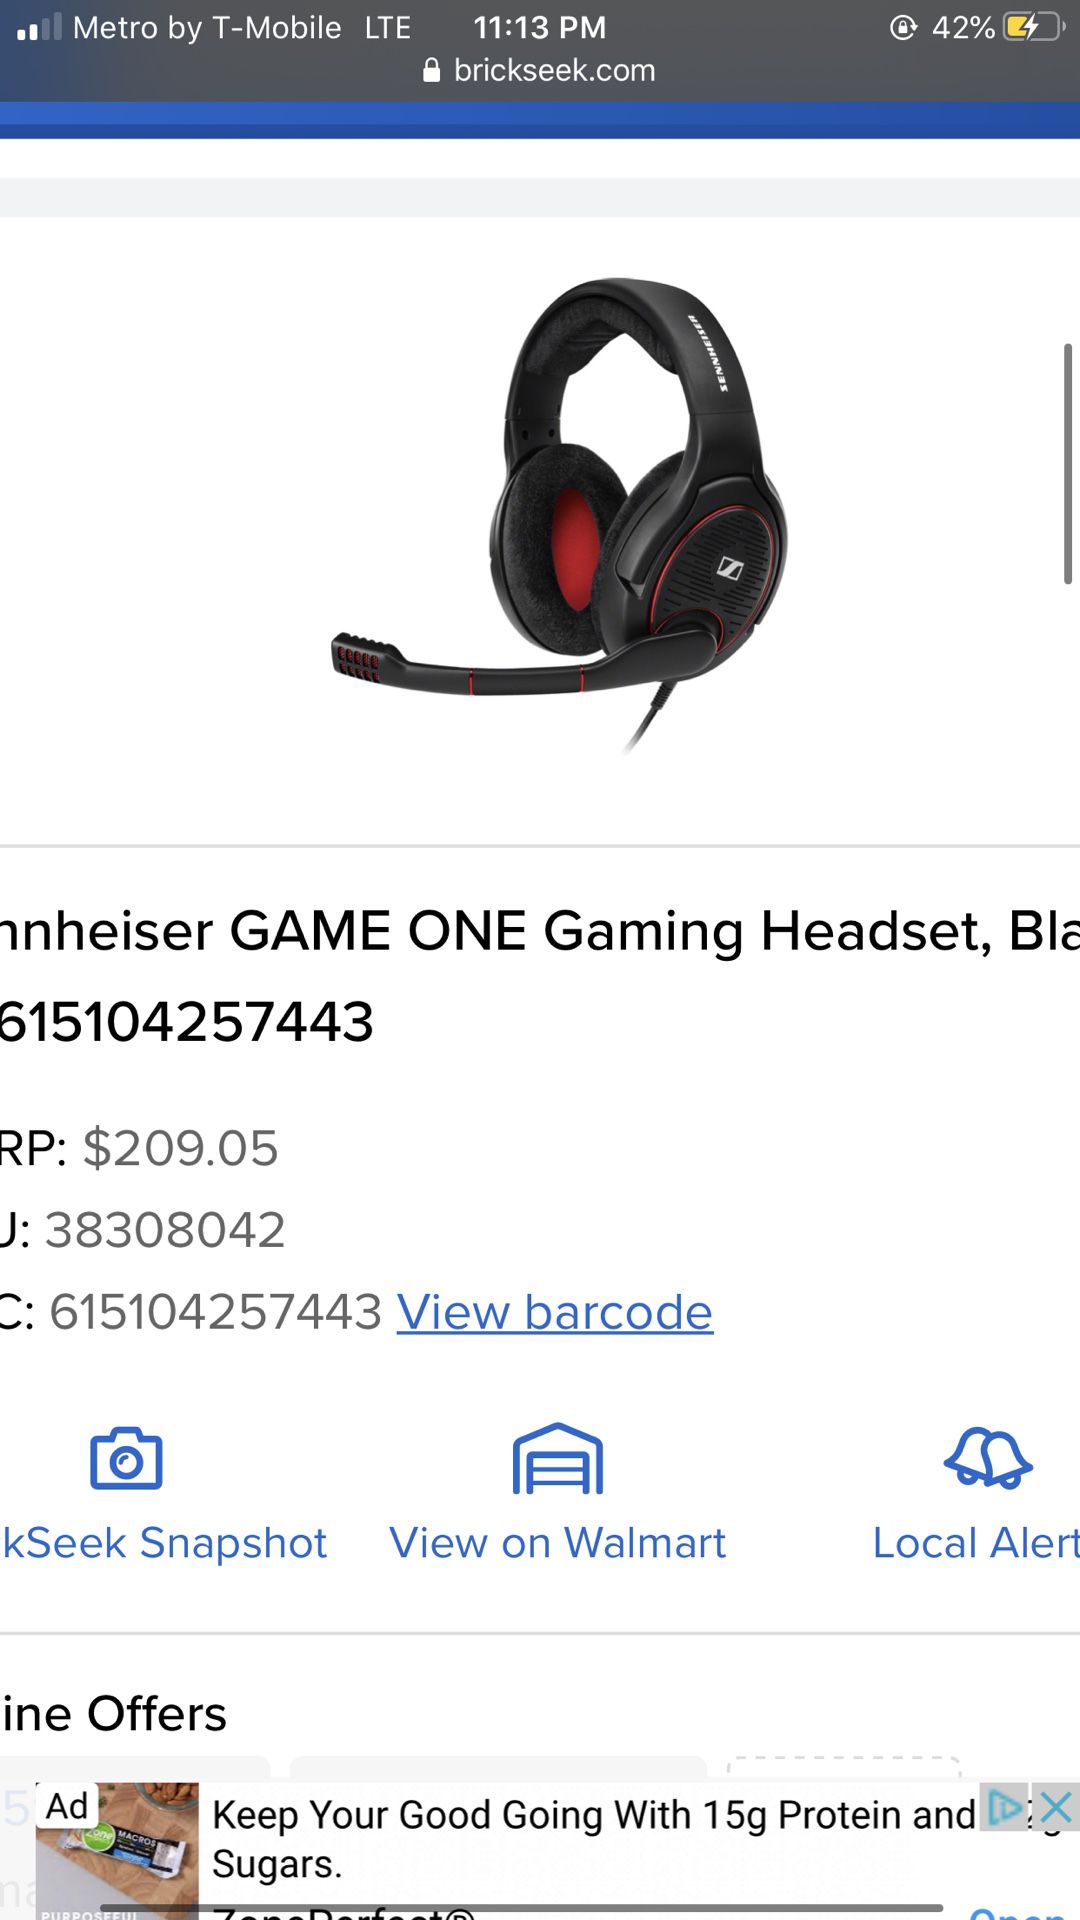 READ DESCRIPTION Headphones with mic for gaming Both for $45